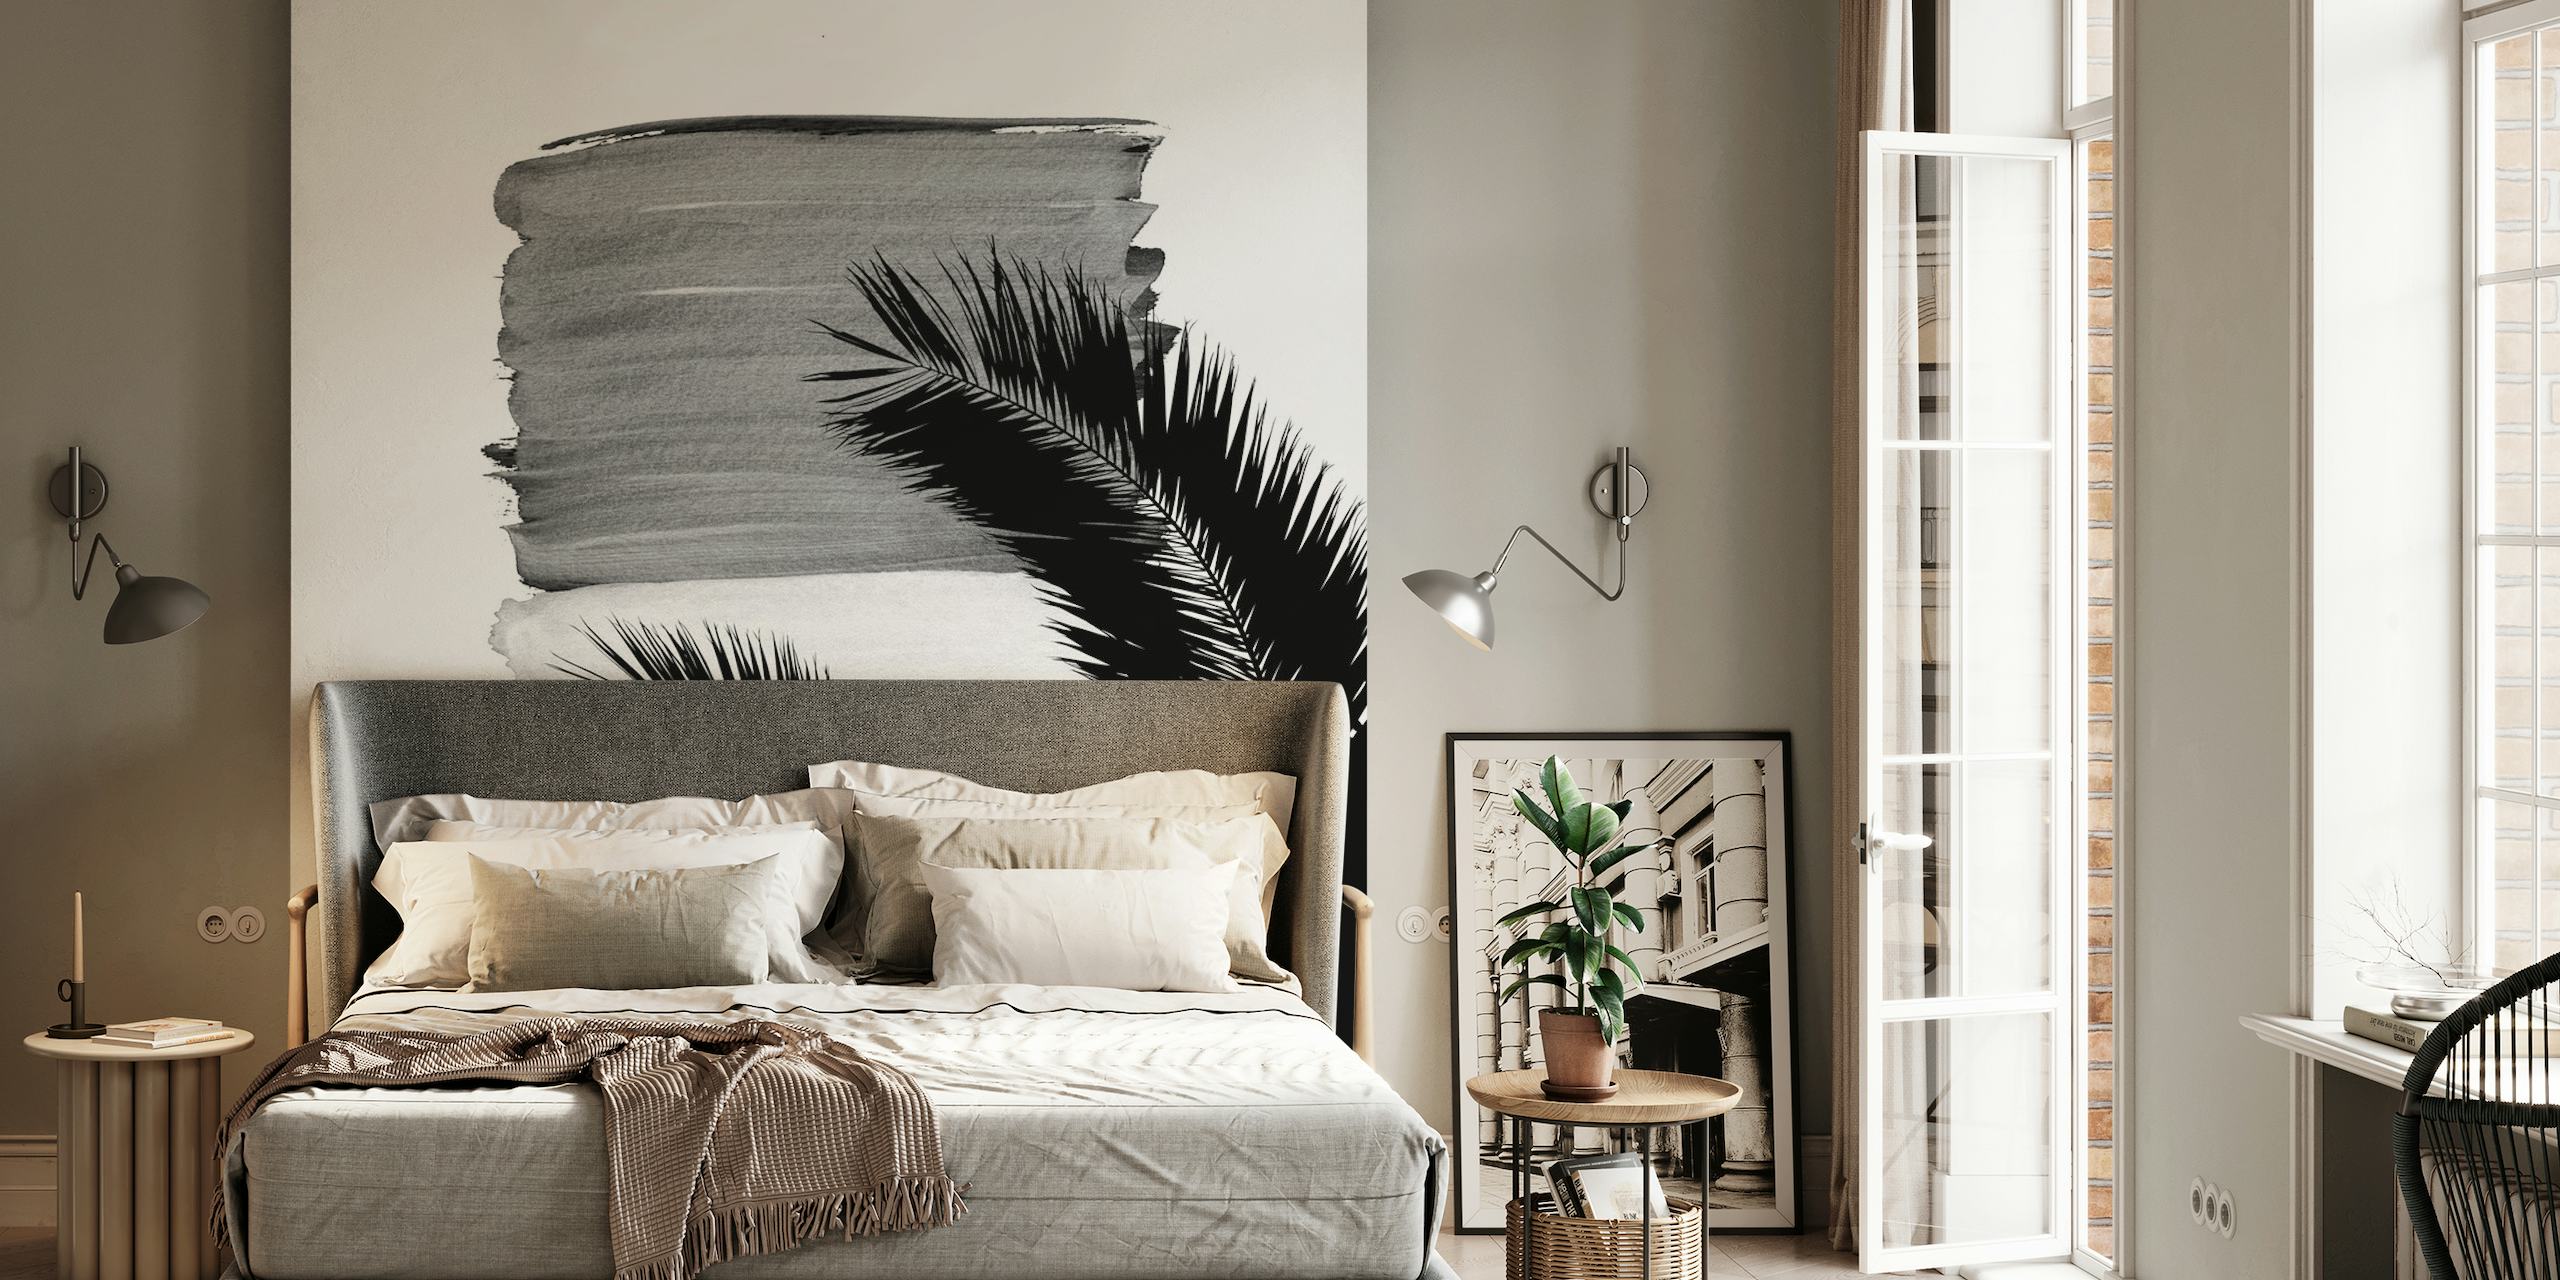 Monochrome abstract mural with palm leaf silhouettes